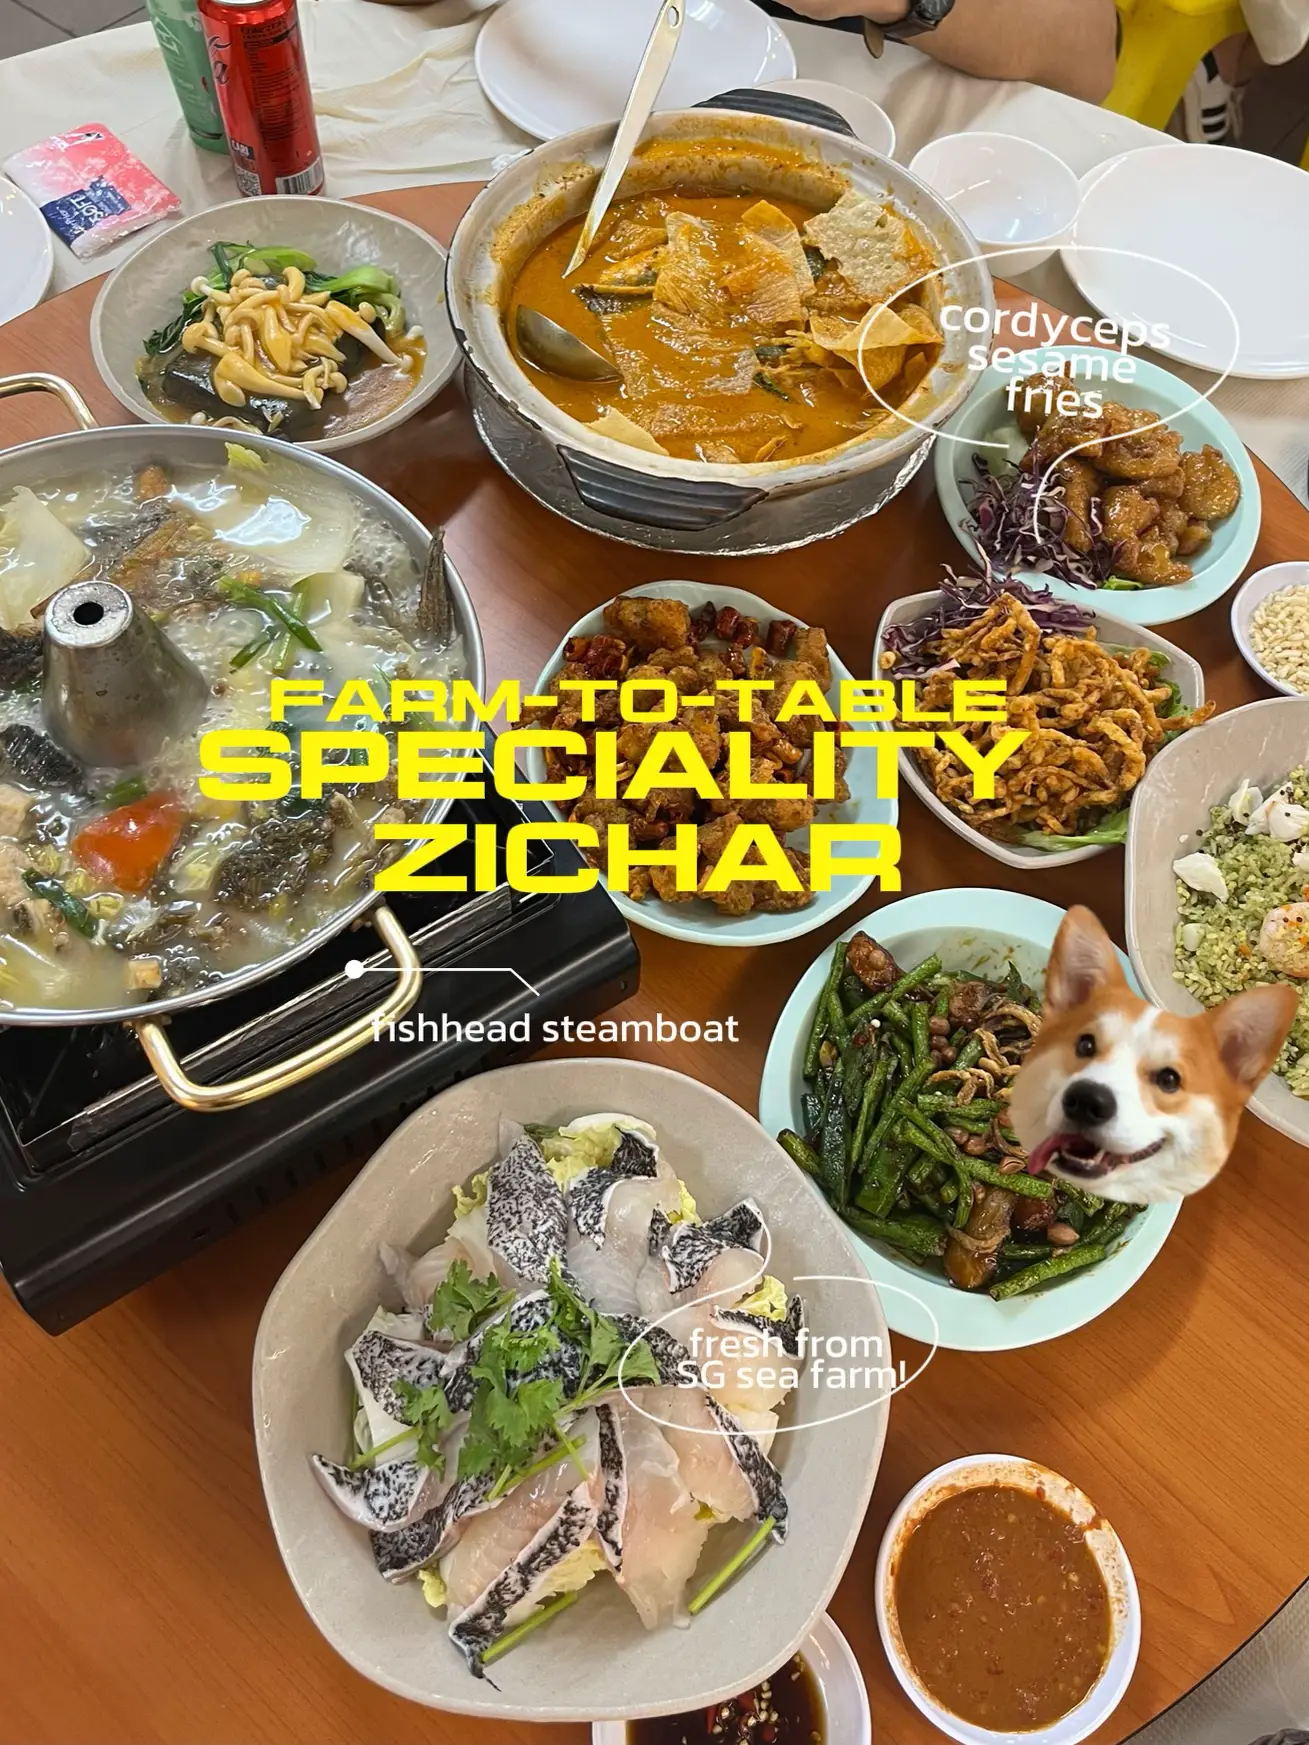 NEW Farm-to-table zichar spot! 🤤's images